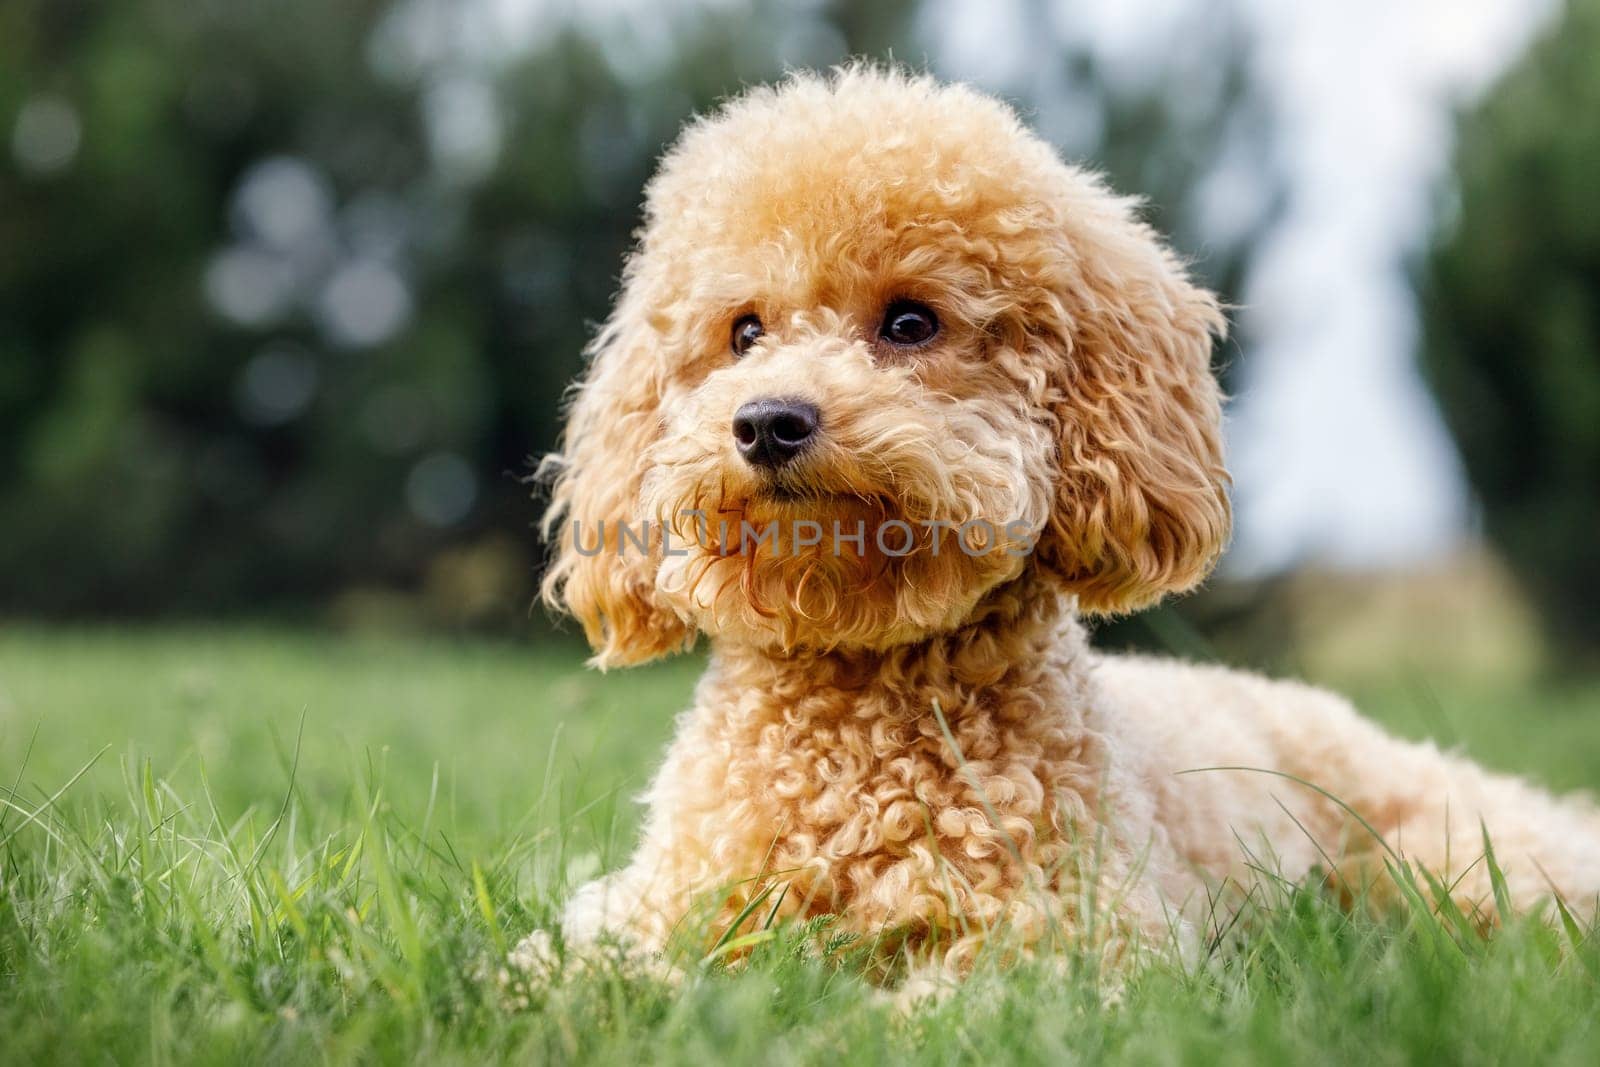 Poodle on the grass. Dog in nature. Dog of the Poodle breed. Ready for play time by Lincikas